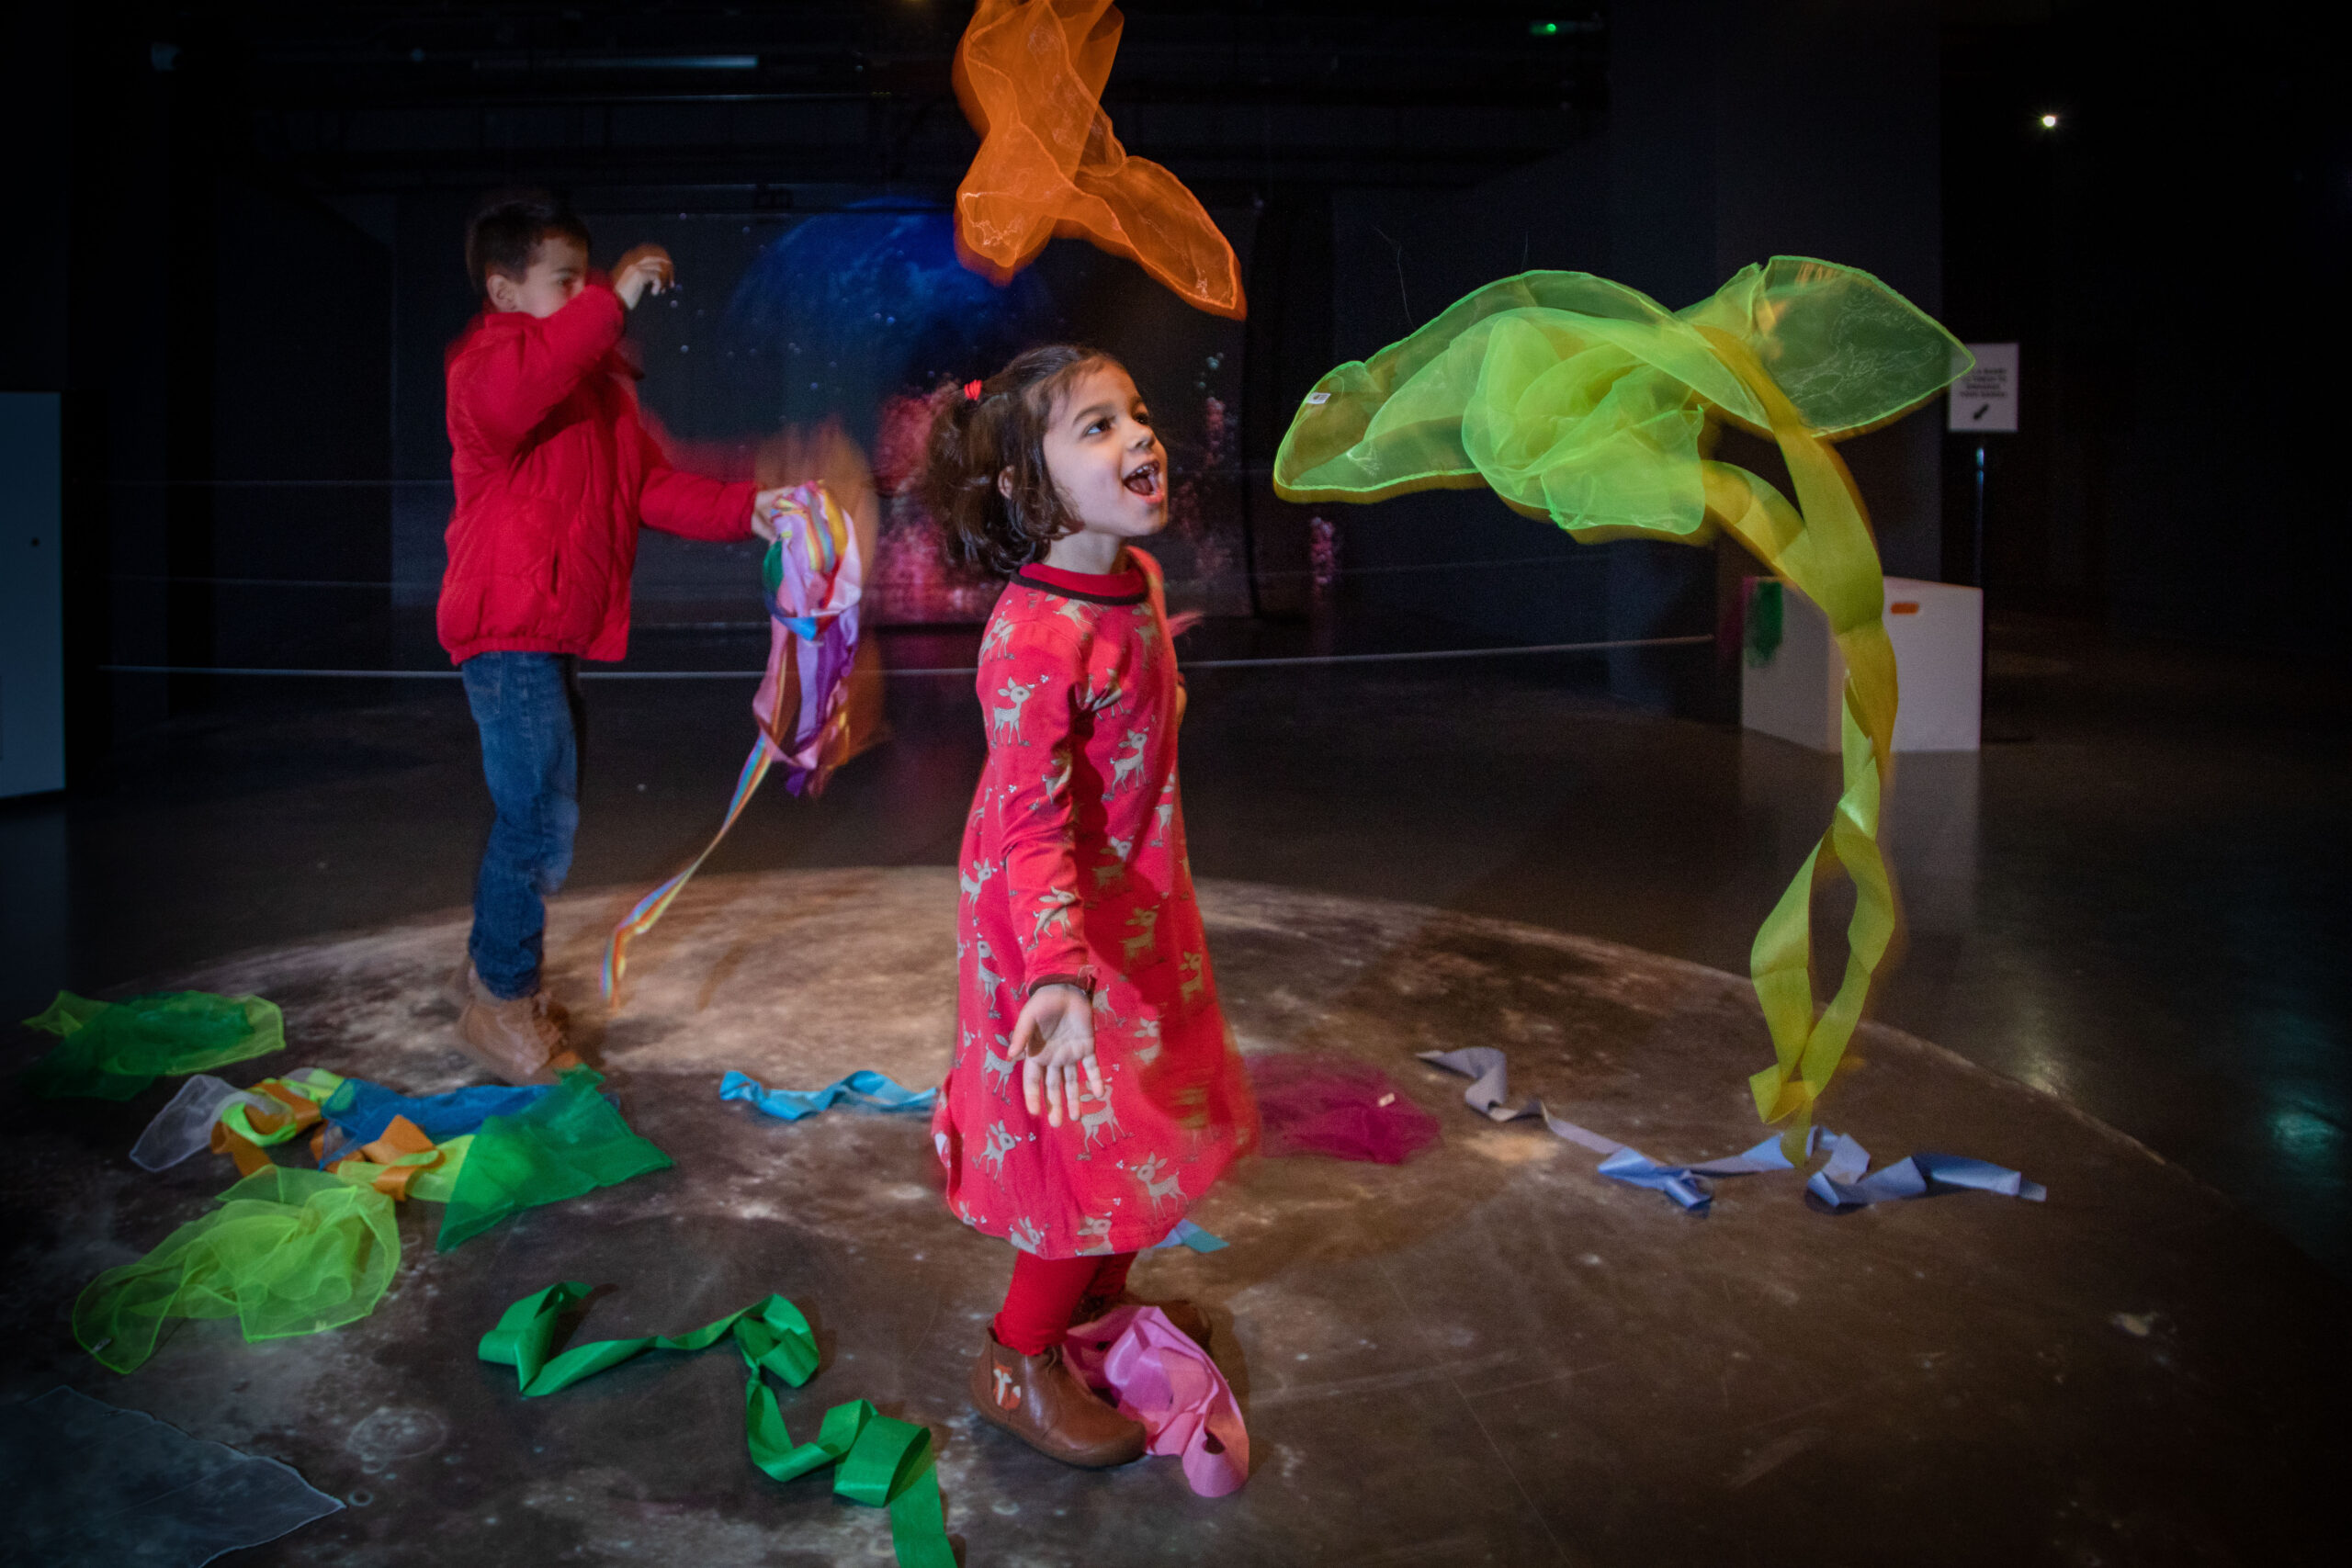 Children dance with coloured scarves in a dark gallery space